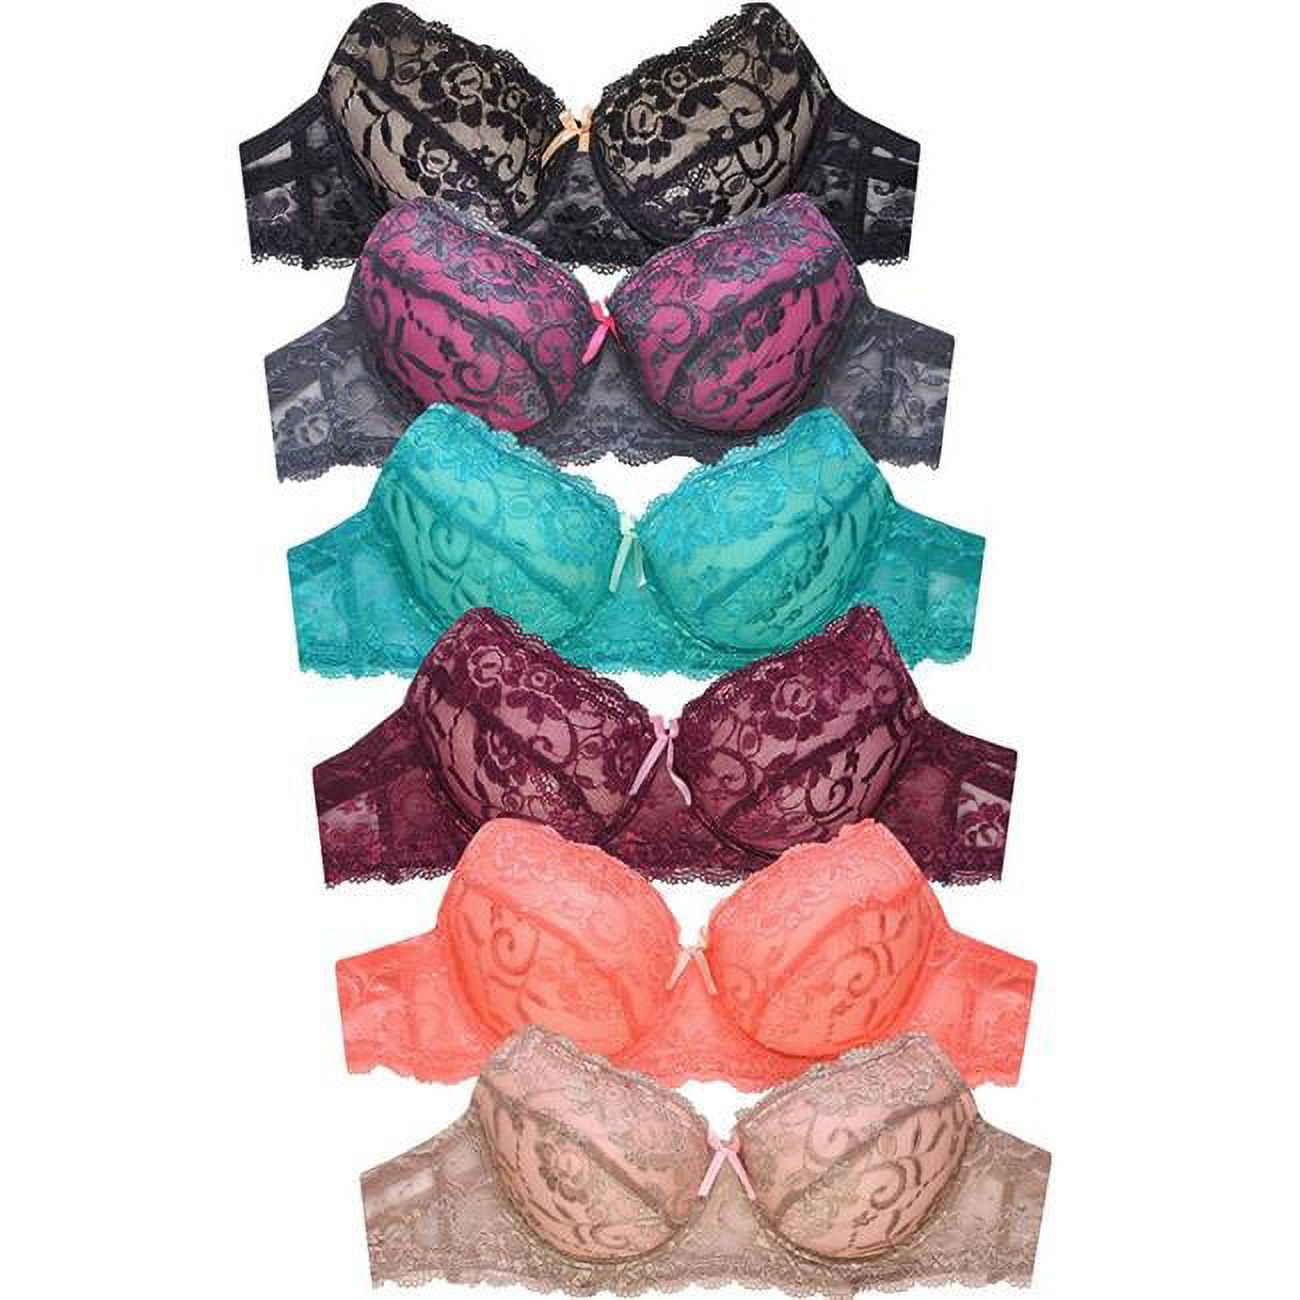 Mamia & Sofra IN-BR4357LD-34D D Cup Full Coverage Bra - Size 34 - Pack of 6  